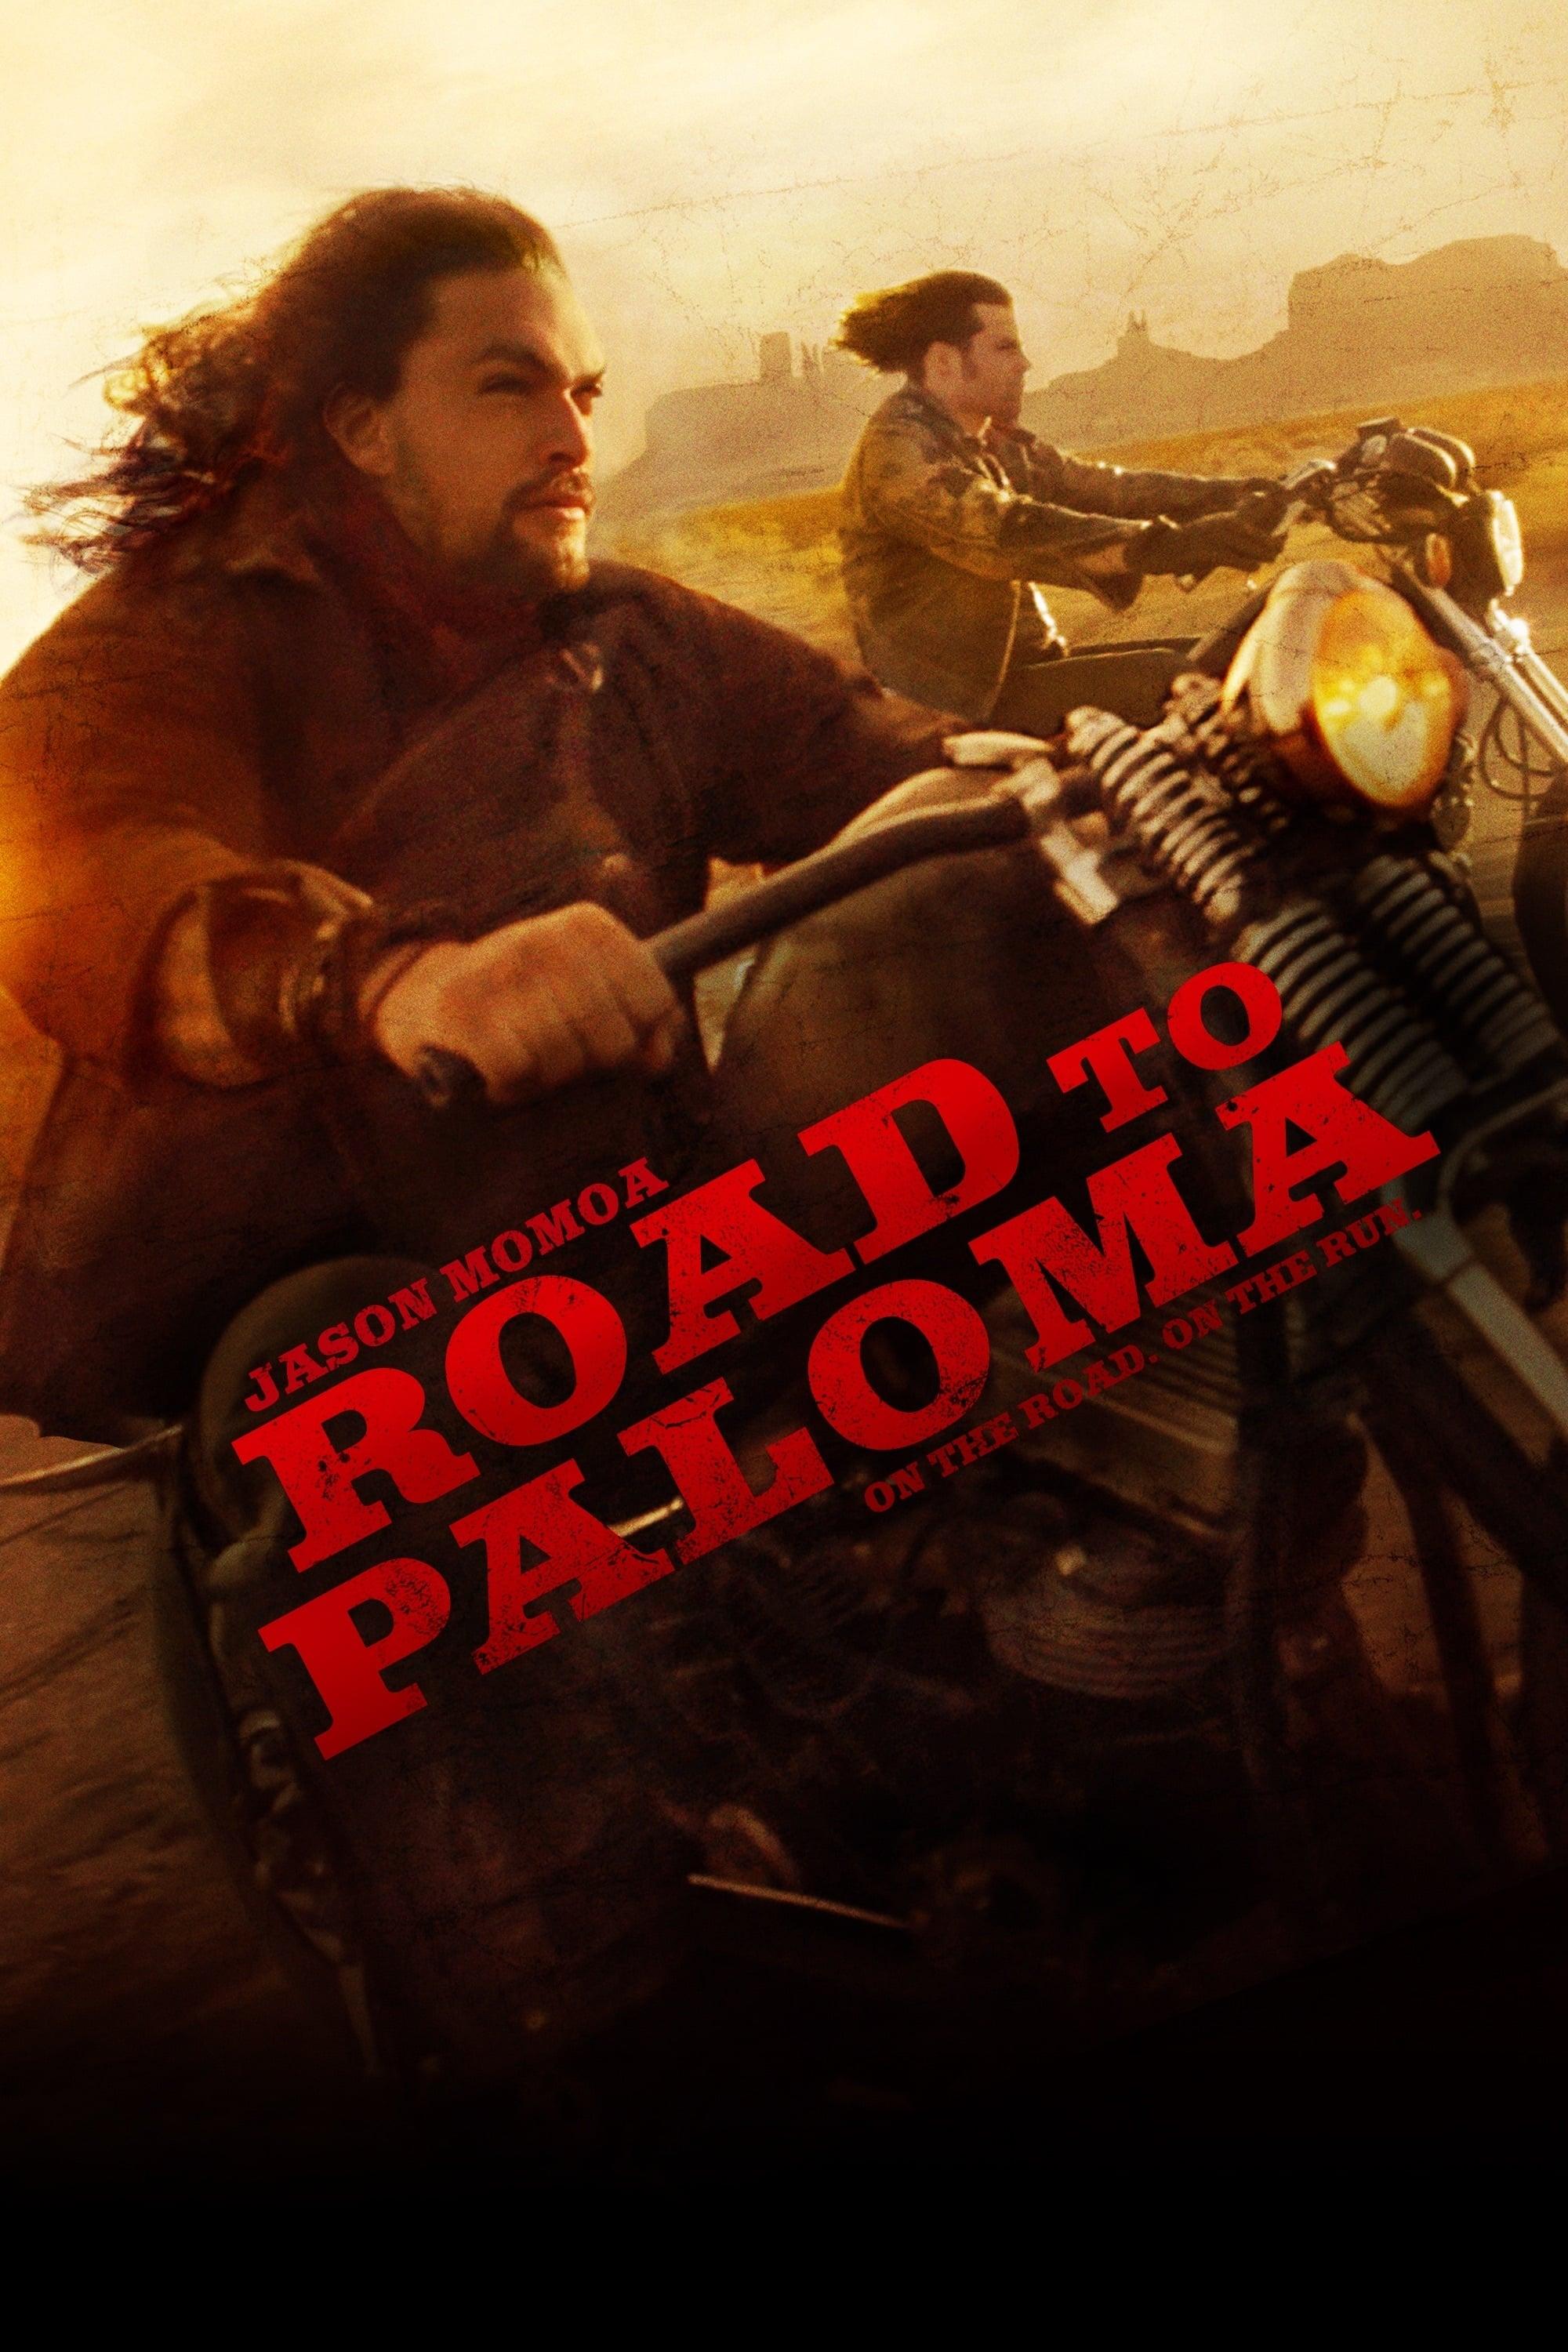 Road to Paloma poster